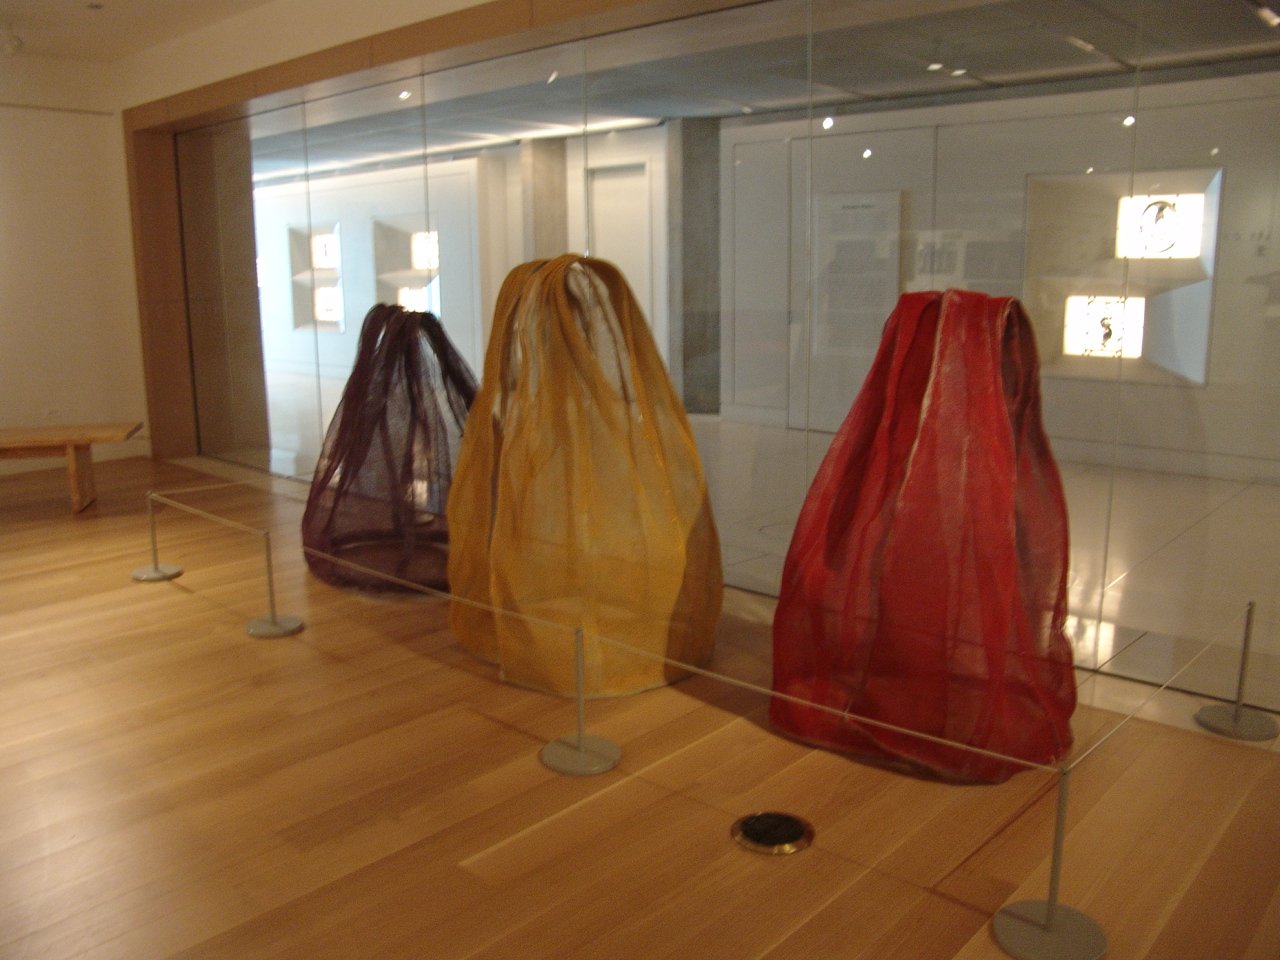 Three poncho sculptures on exhibition.